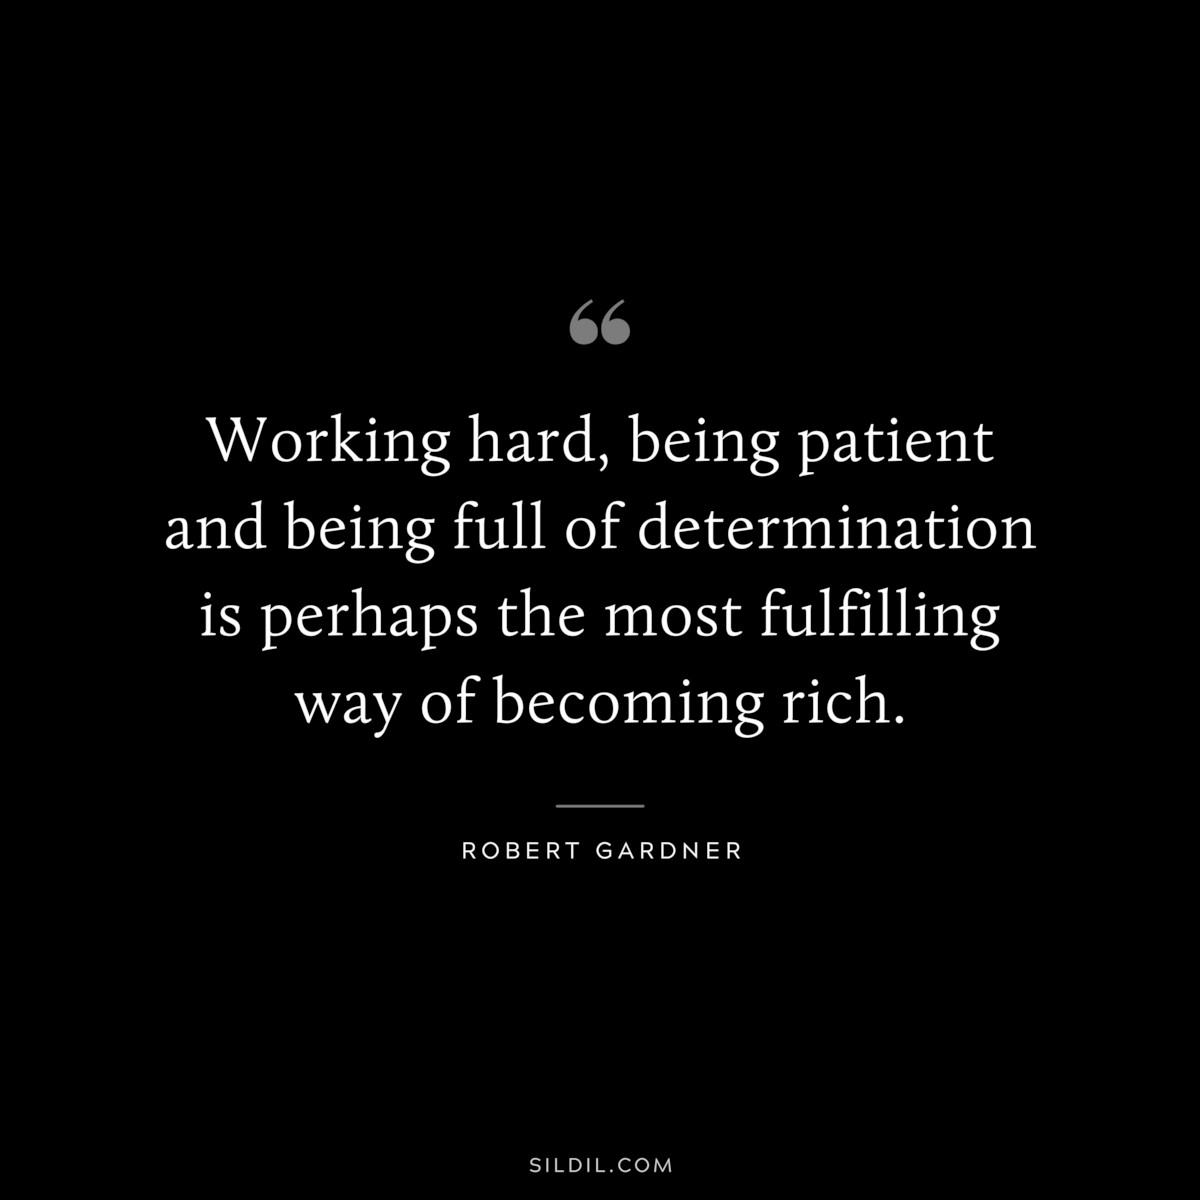 Working hard, being patient and being full of determination is perhaps the most fulfilling way of becoming rich. ― Robert Gardner